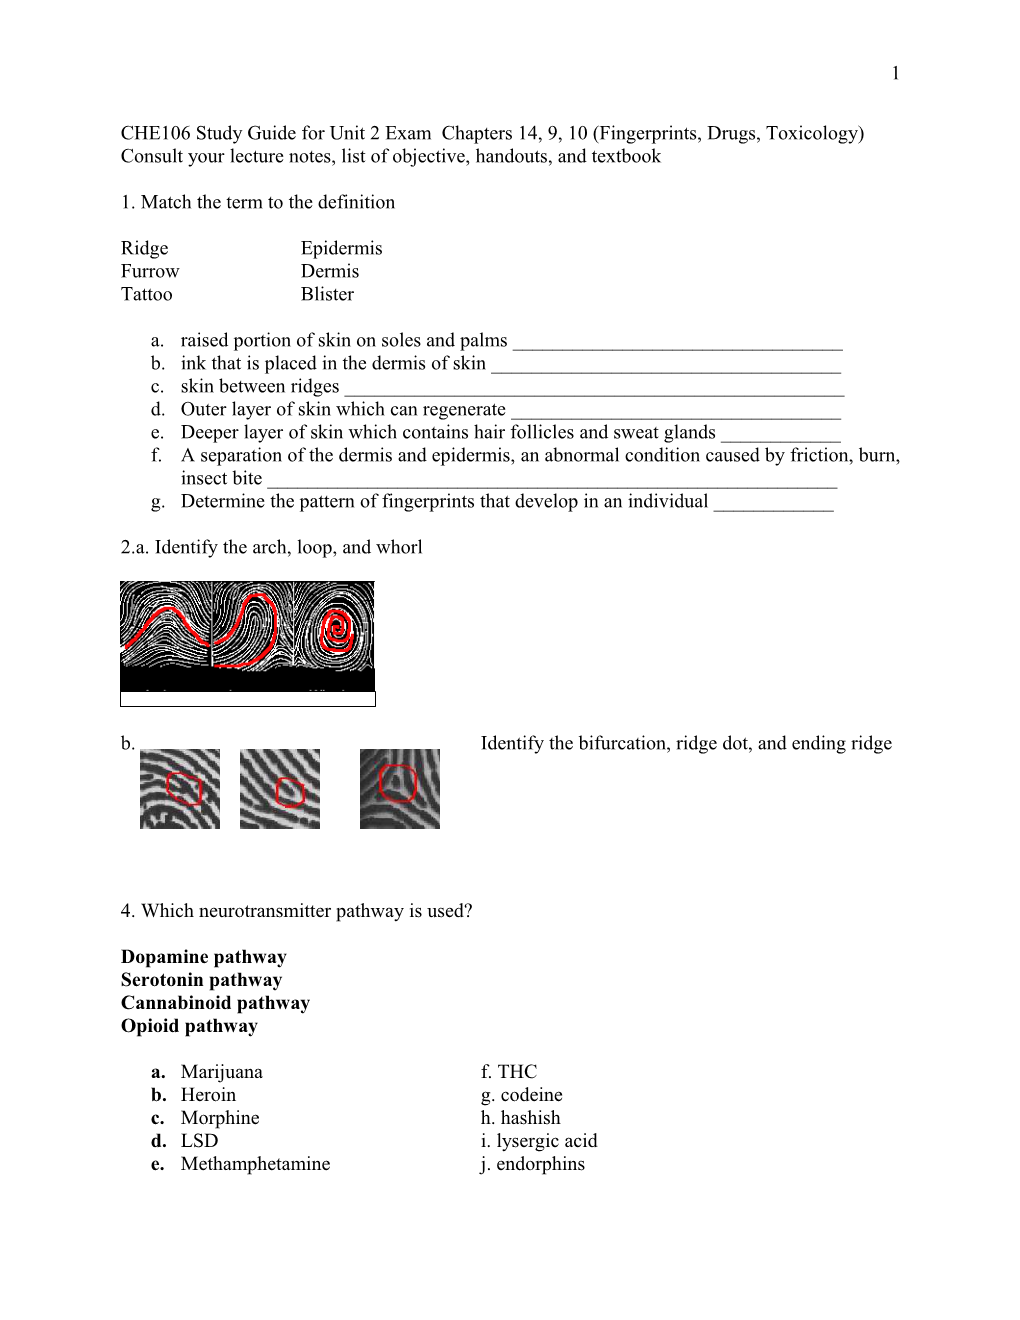 CHE106 Study Guide for Unit 2 Exam Chapters 14, 9, 10 (Fingerprints, Drugs, Toxicology)